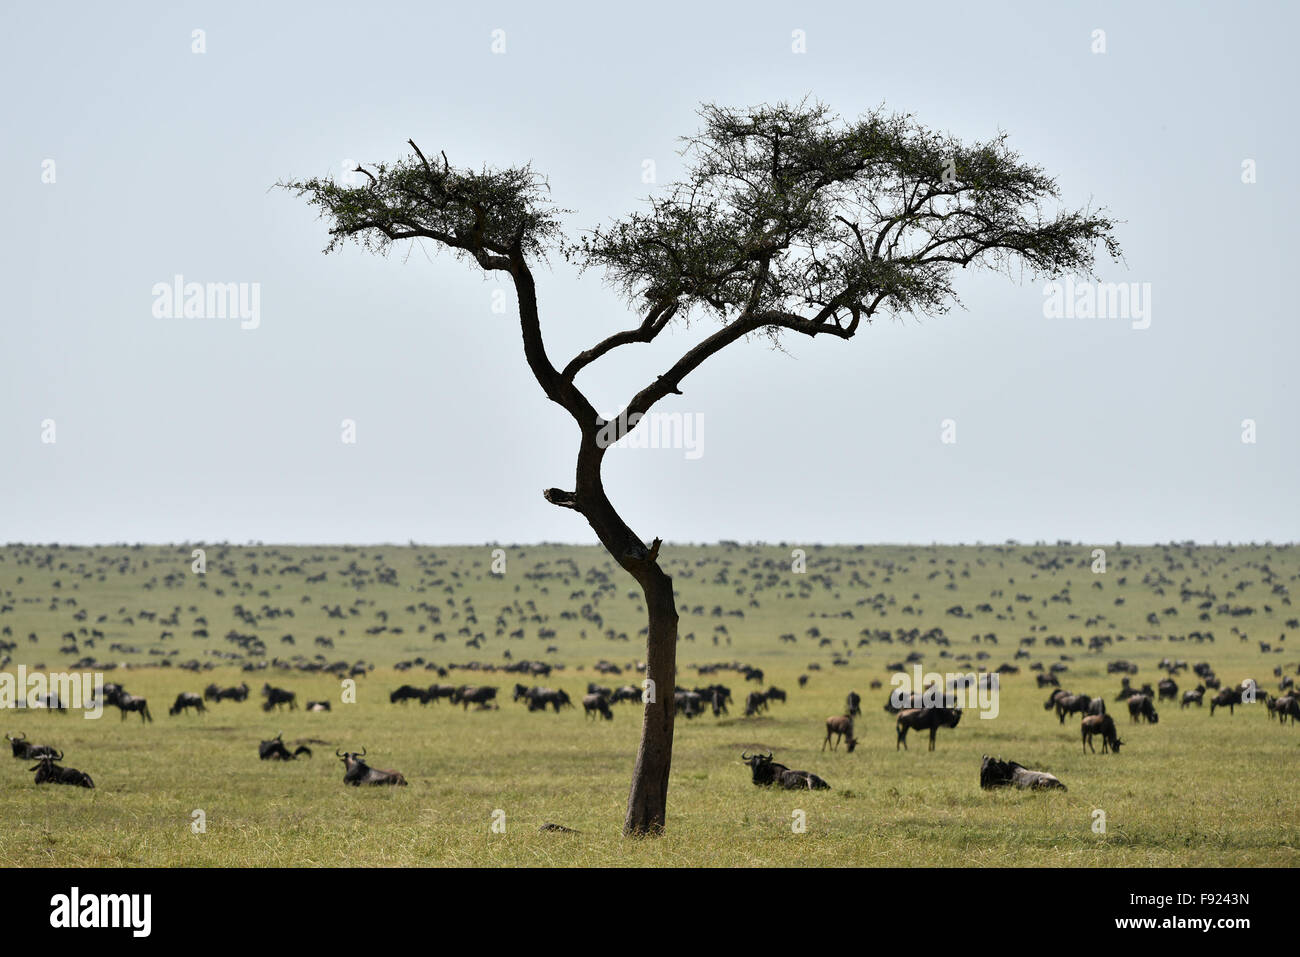 (151213) -- MASAI MARA, Dec. 13, 2015 (Xinhua) -- Wildebeests rest on the savanna in Kenya's Masai Mara National Reserve, on Aug. 16, 2015. As a country Kenya has considerable land area devoted to wildlife habitats. The tropical wet and dry climate created a vast tropical savanna for Kenya and for the wildlife to thrill. In return, the great savanna and the diverse wildlife brought the country a worldwide reputation. Alone in Masai Mara National Reserve, there are approximately 95 mammal species and 450 bird species. All five of the 'Big Five' game animals of Africa, that is the lion, leopard, Stock Photo